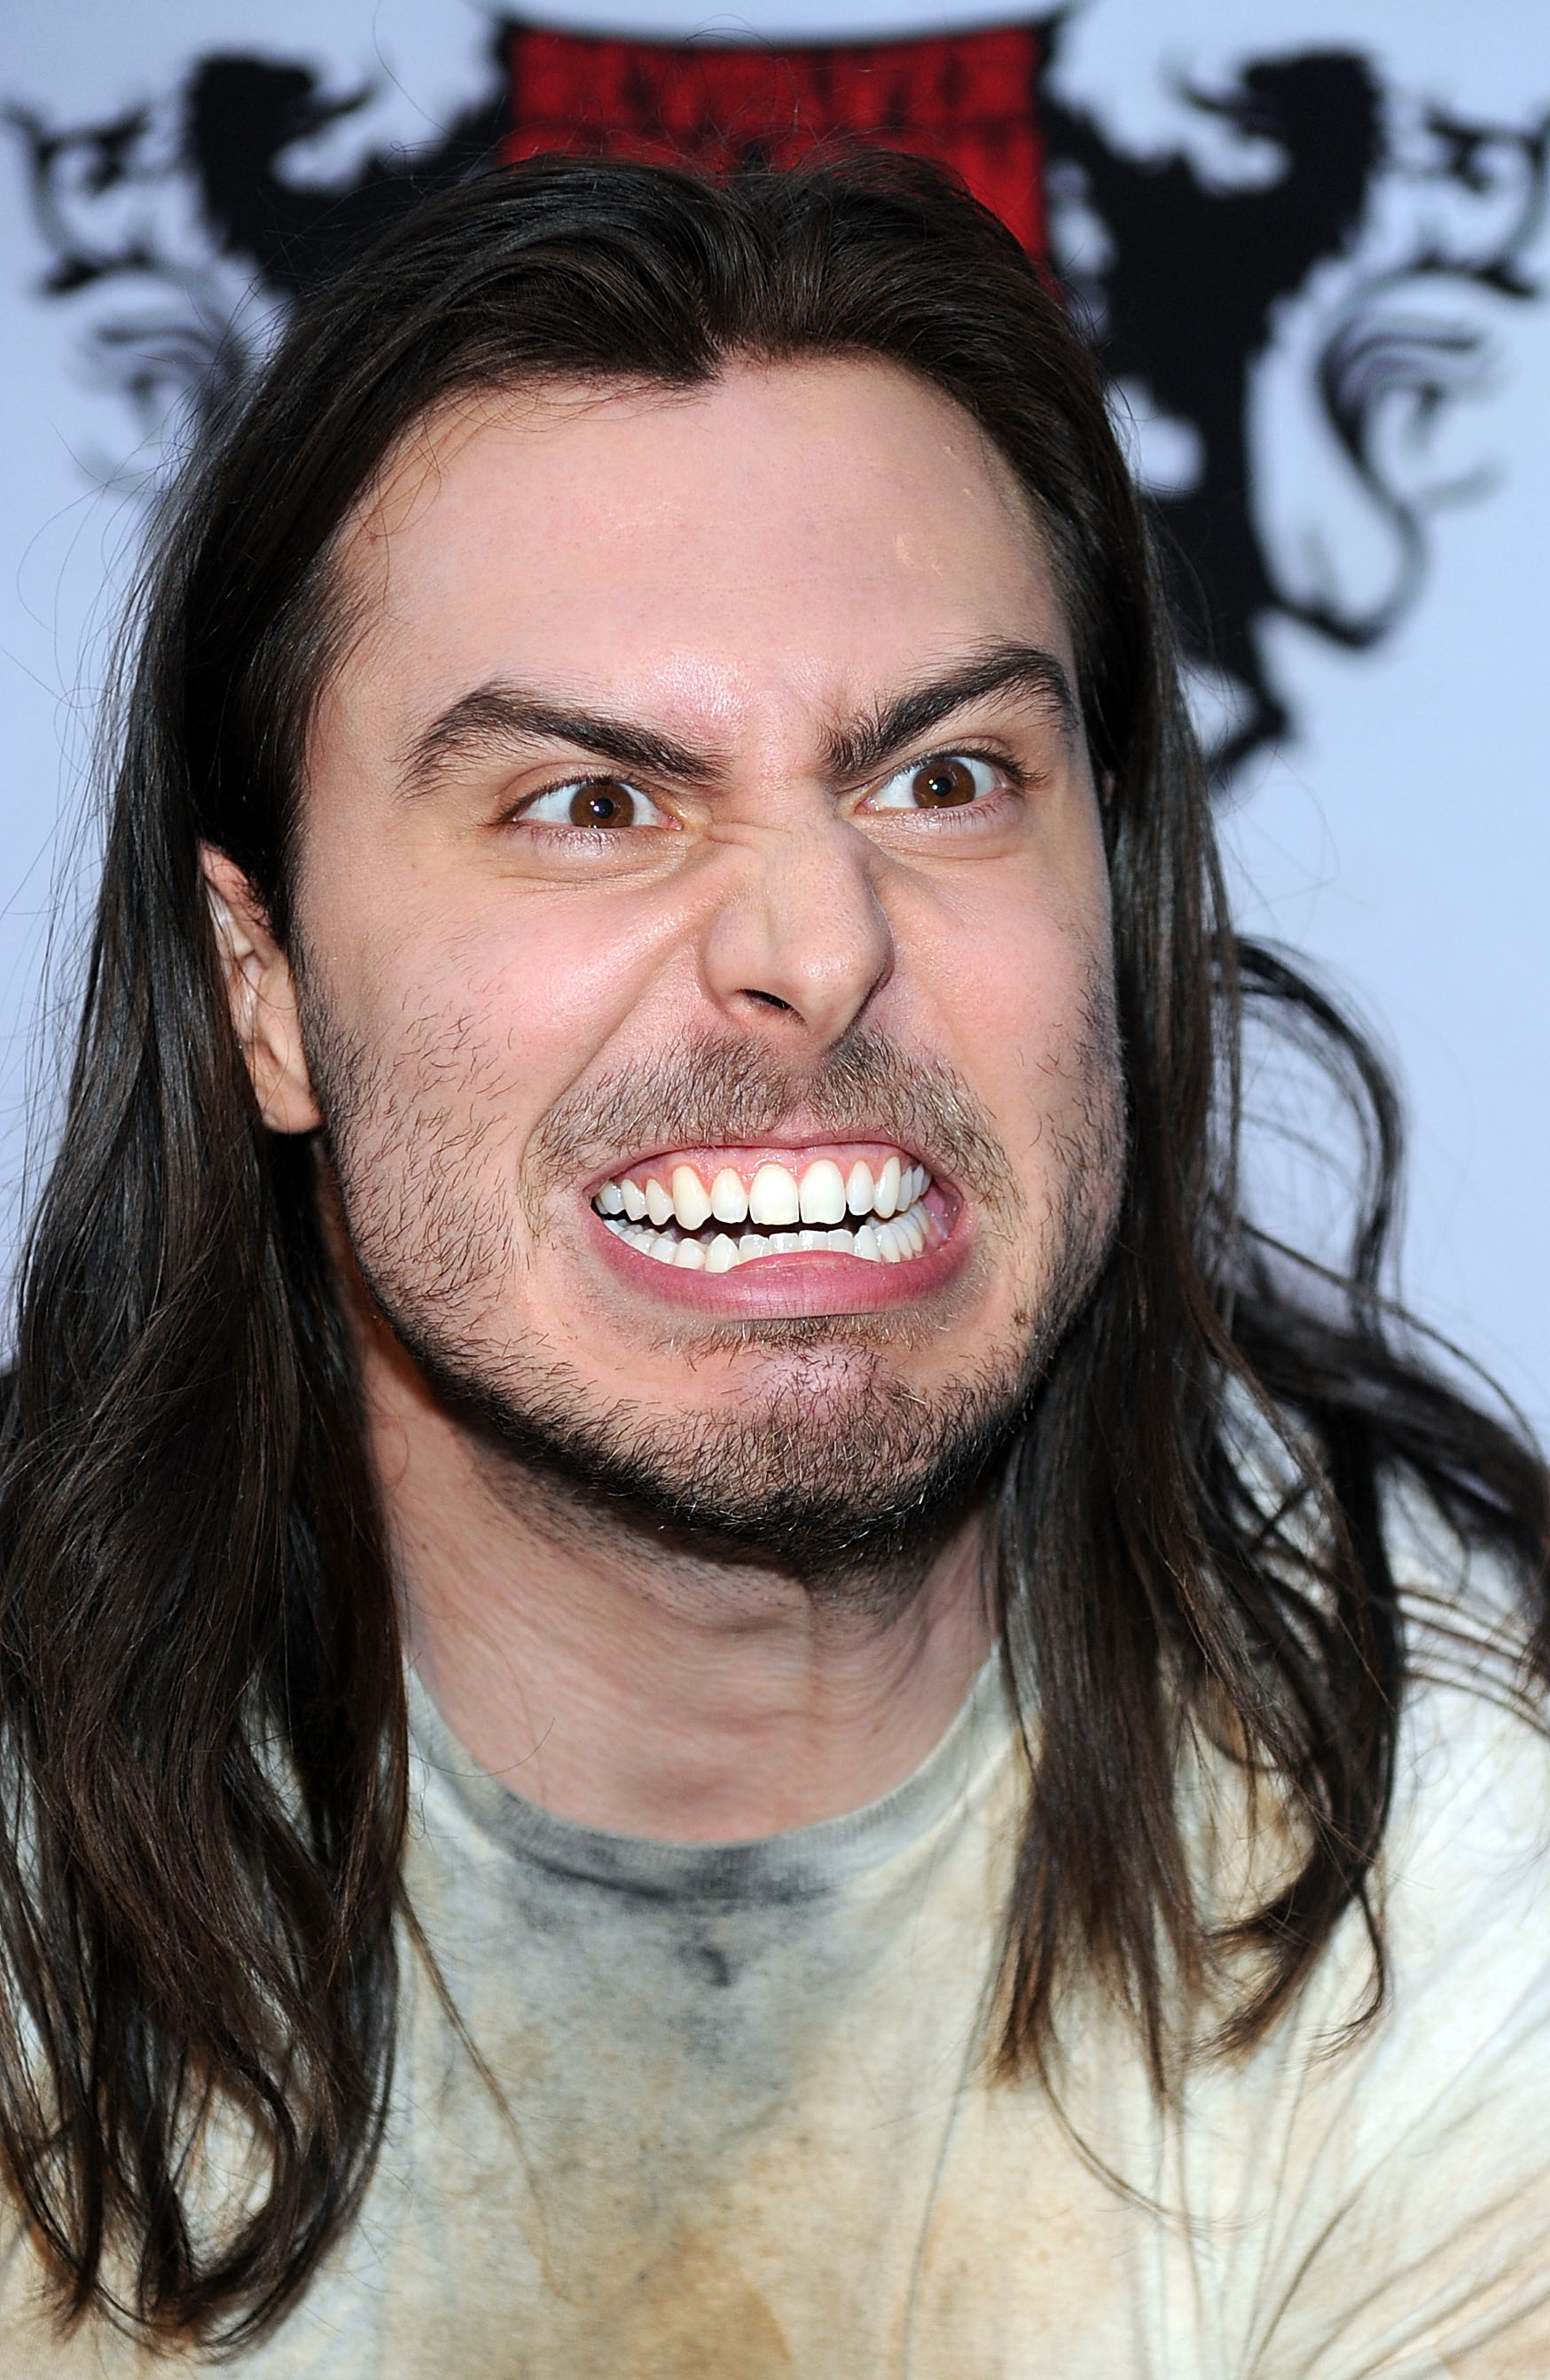 Musician Andrew W.K. arrives at the 2nd annual Revolver Golden Gods Awards held at Club Nokia on April 8, 2010 in Los Angeles, California. (Frazer Harrison—Getty Images)